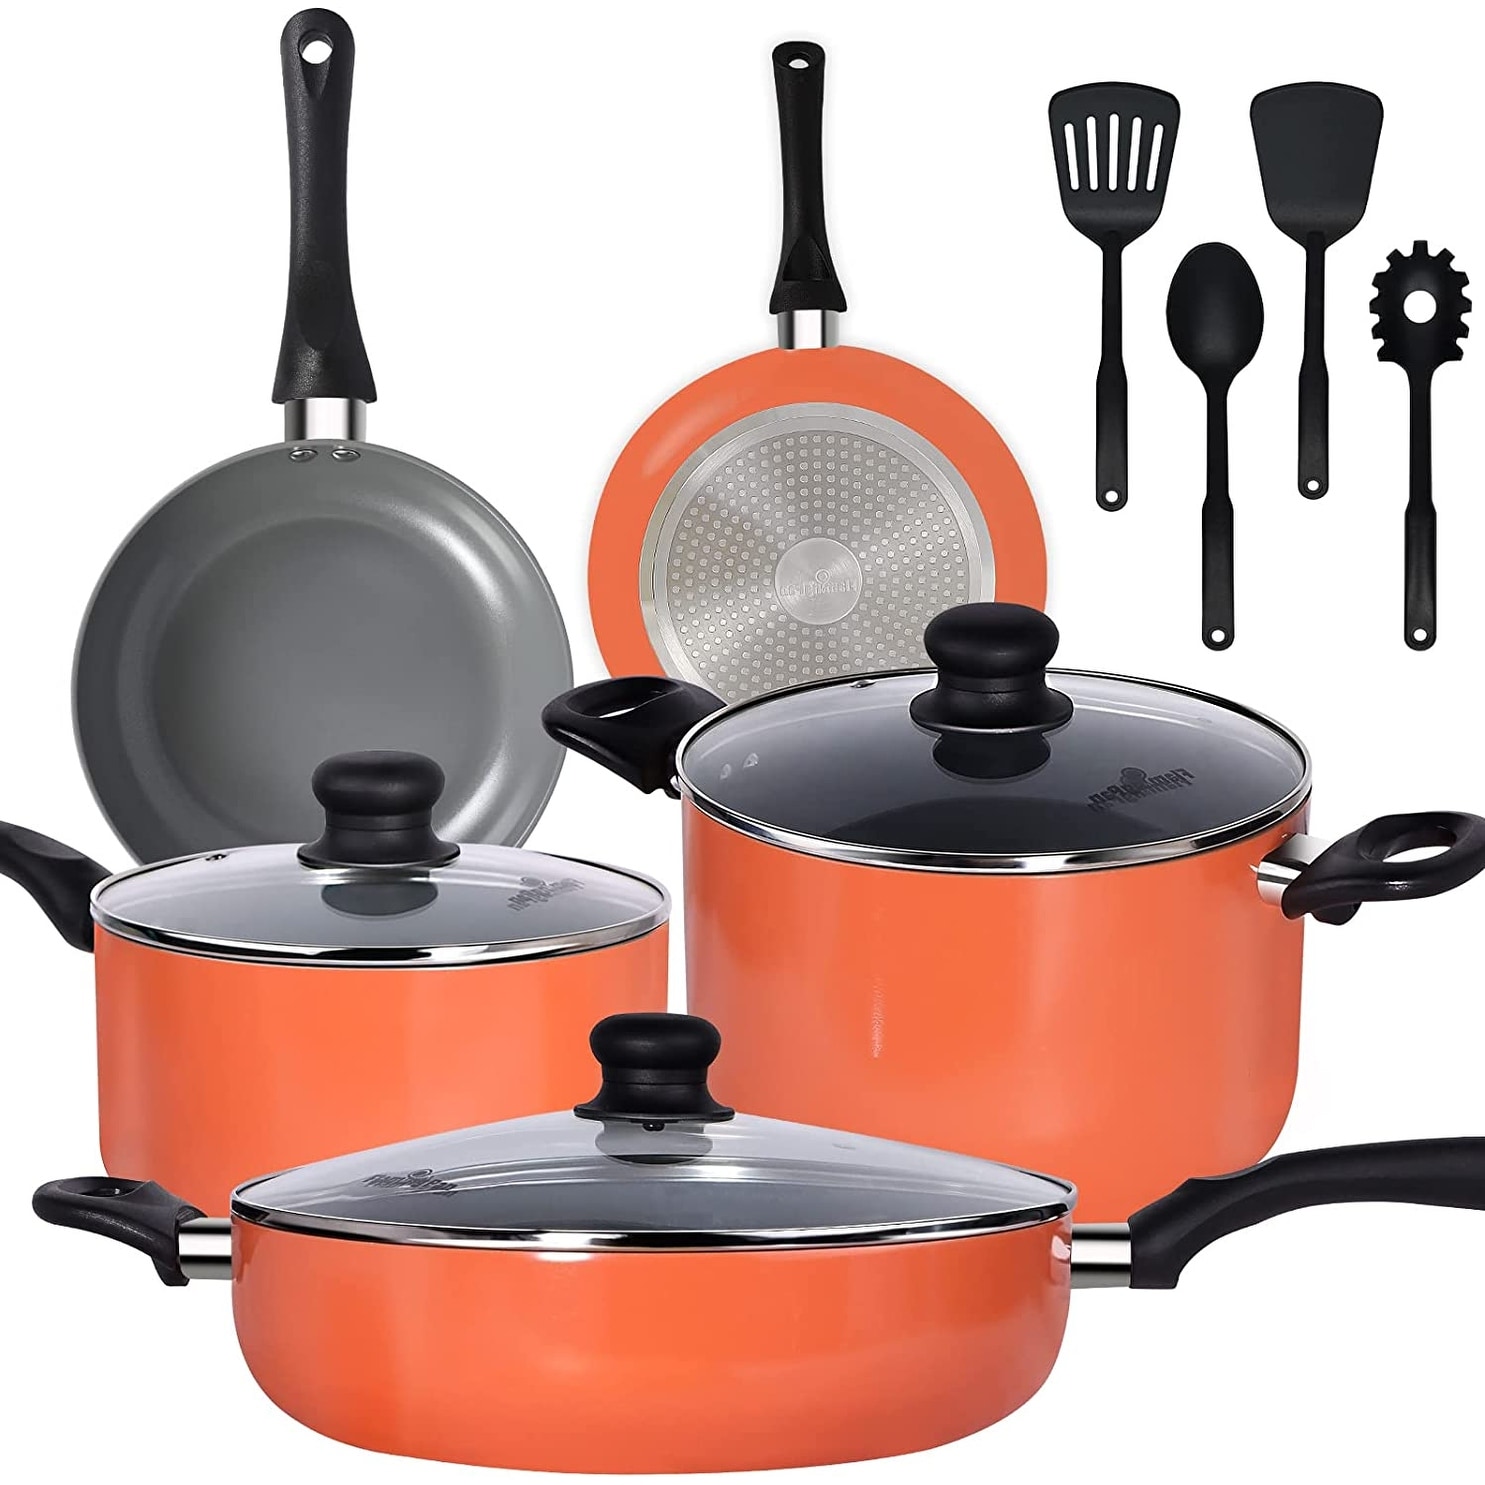 Nonstick Cookware Set 12 Piece Kitchen Ceramic Pots and Pans with